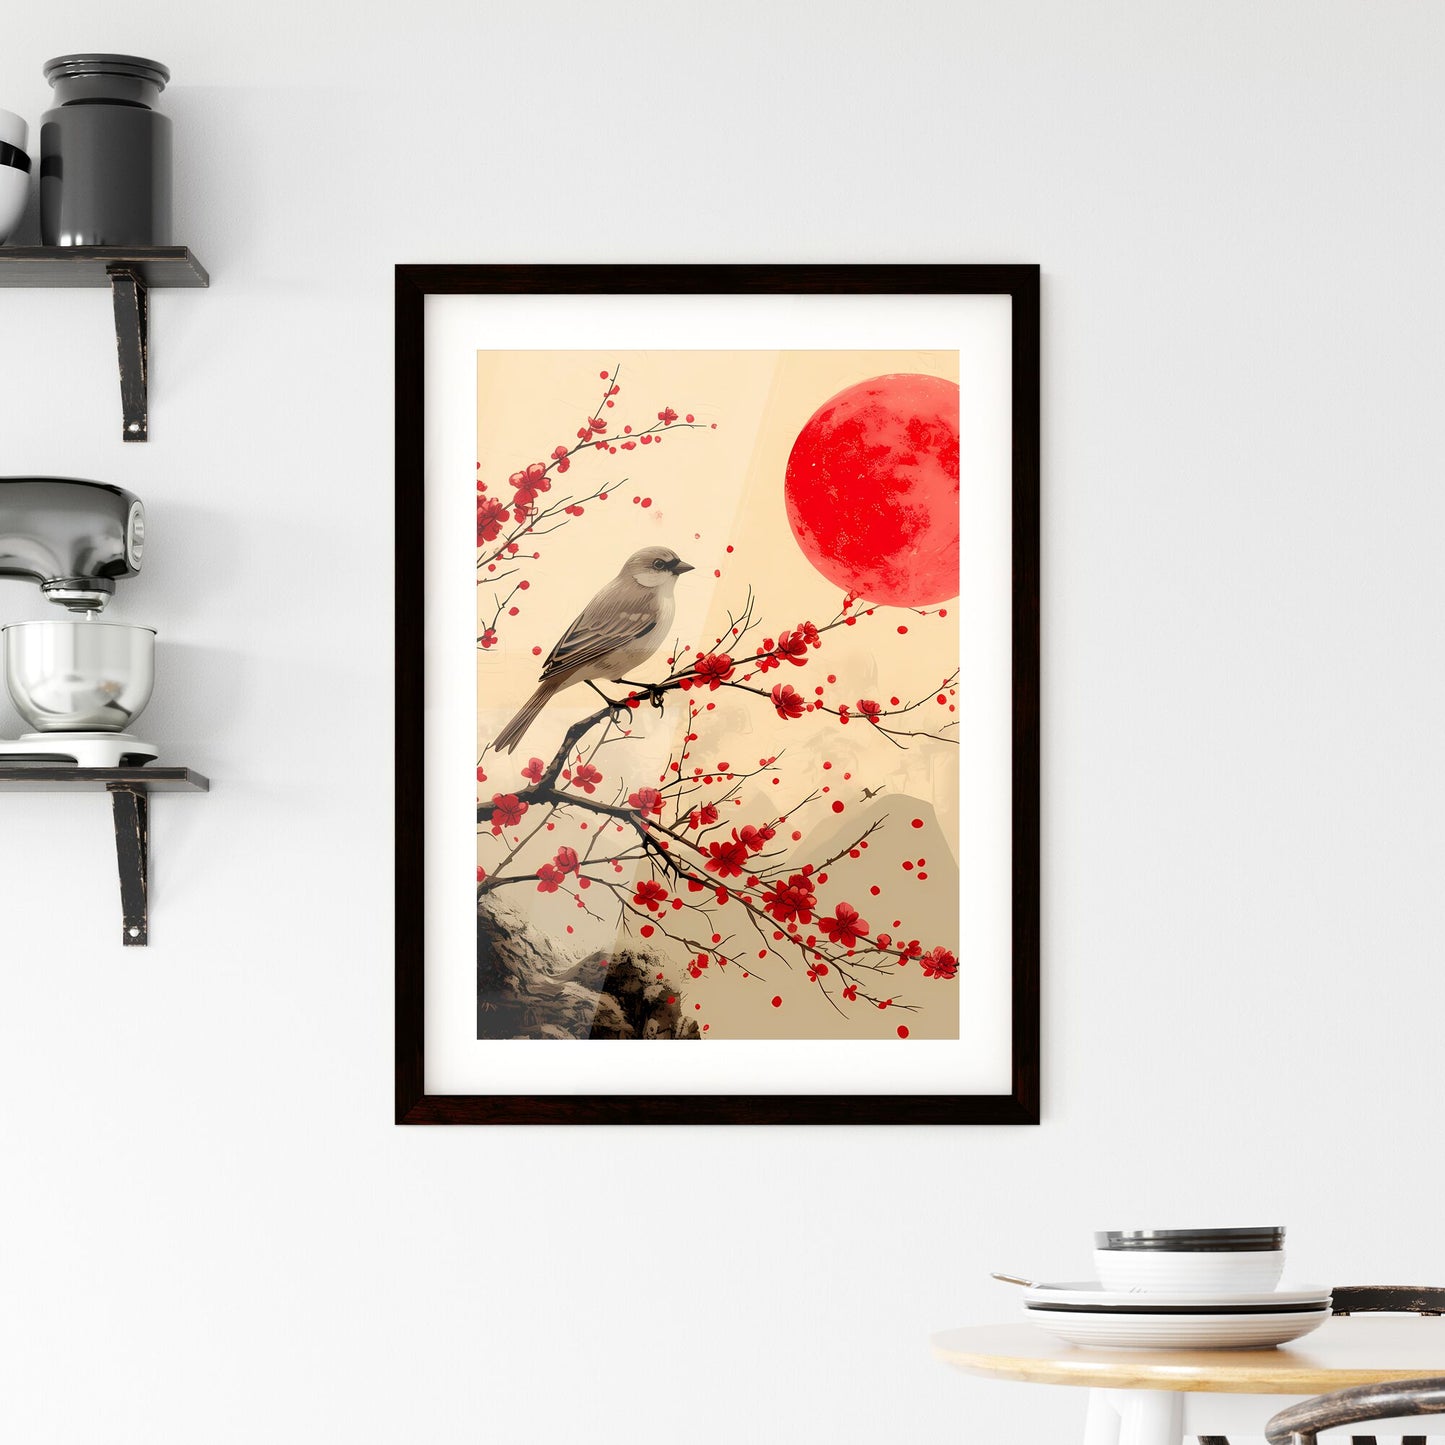 Zhuque paper-cut, new Chinese style, Chinese wind, pattern pattern - Art print of a bird on a branch with red flowers Default Title